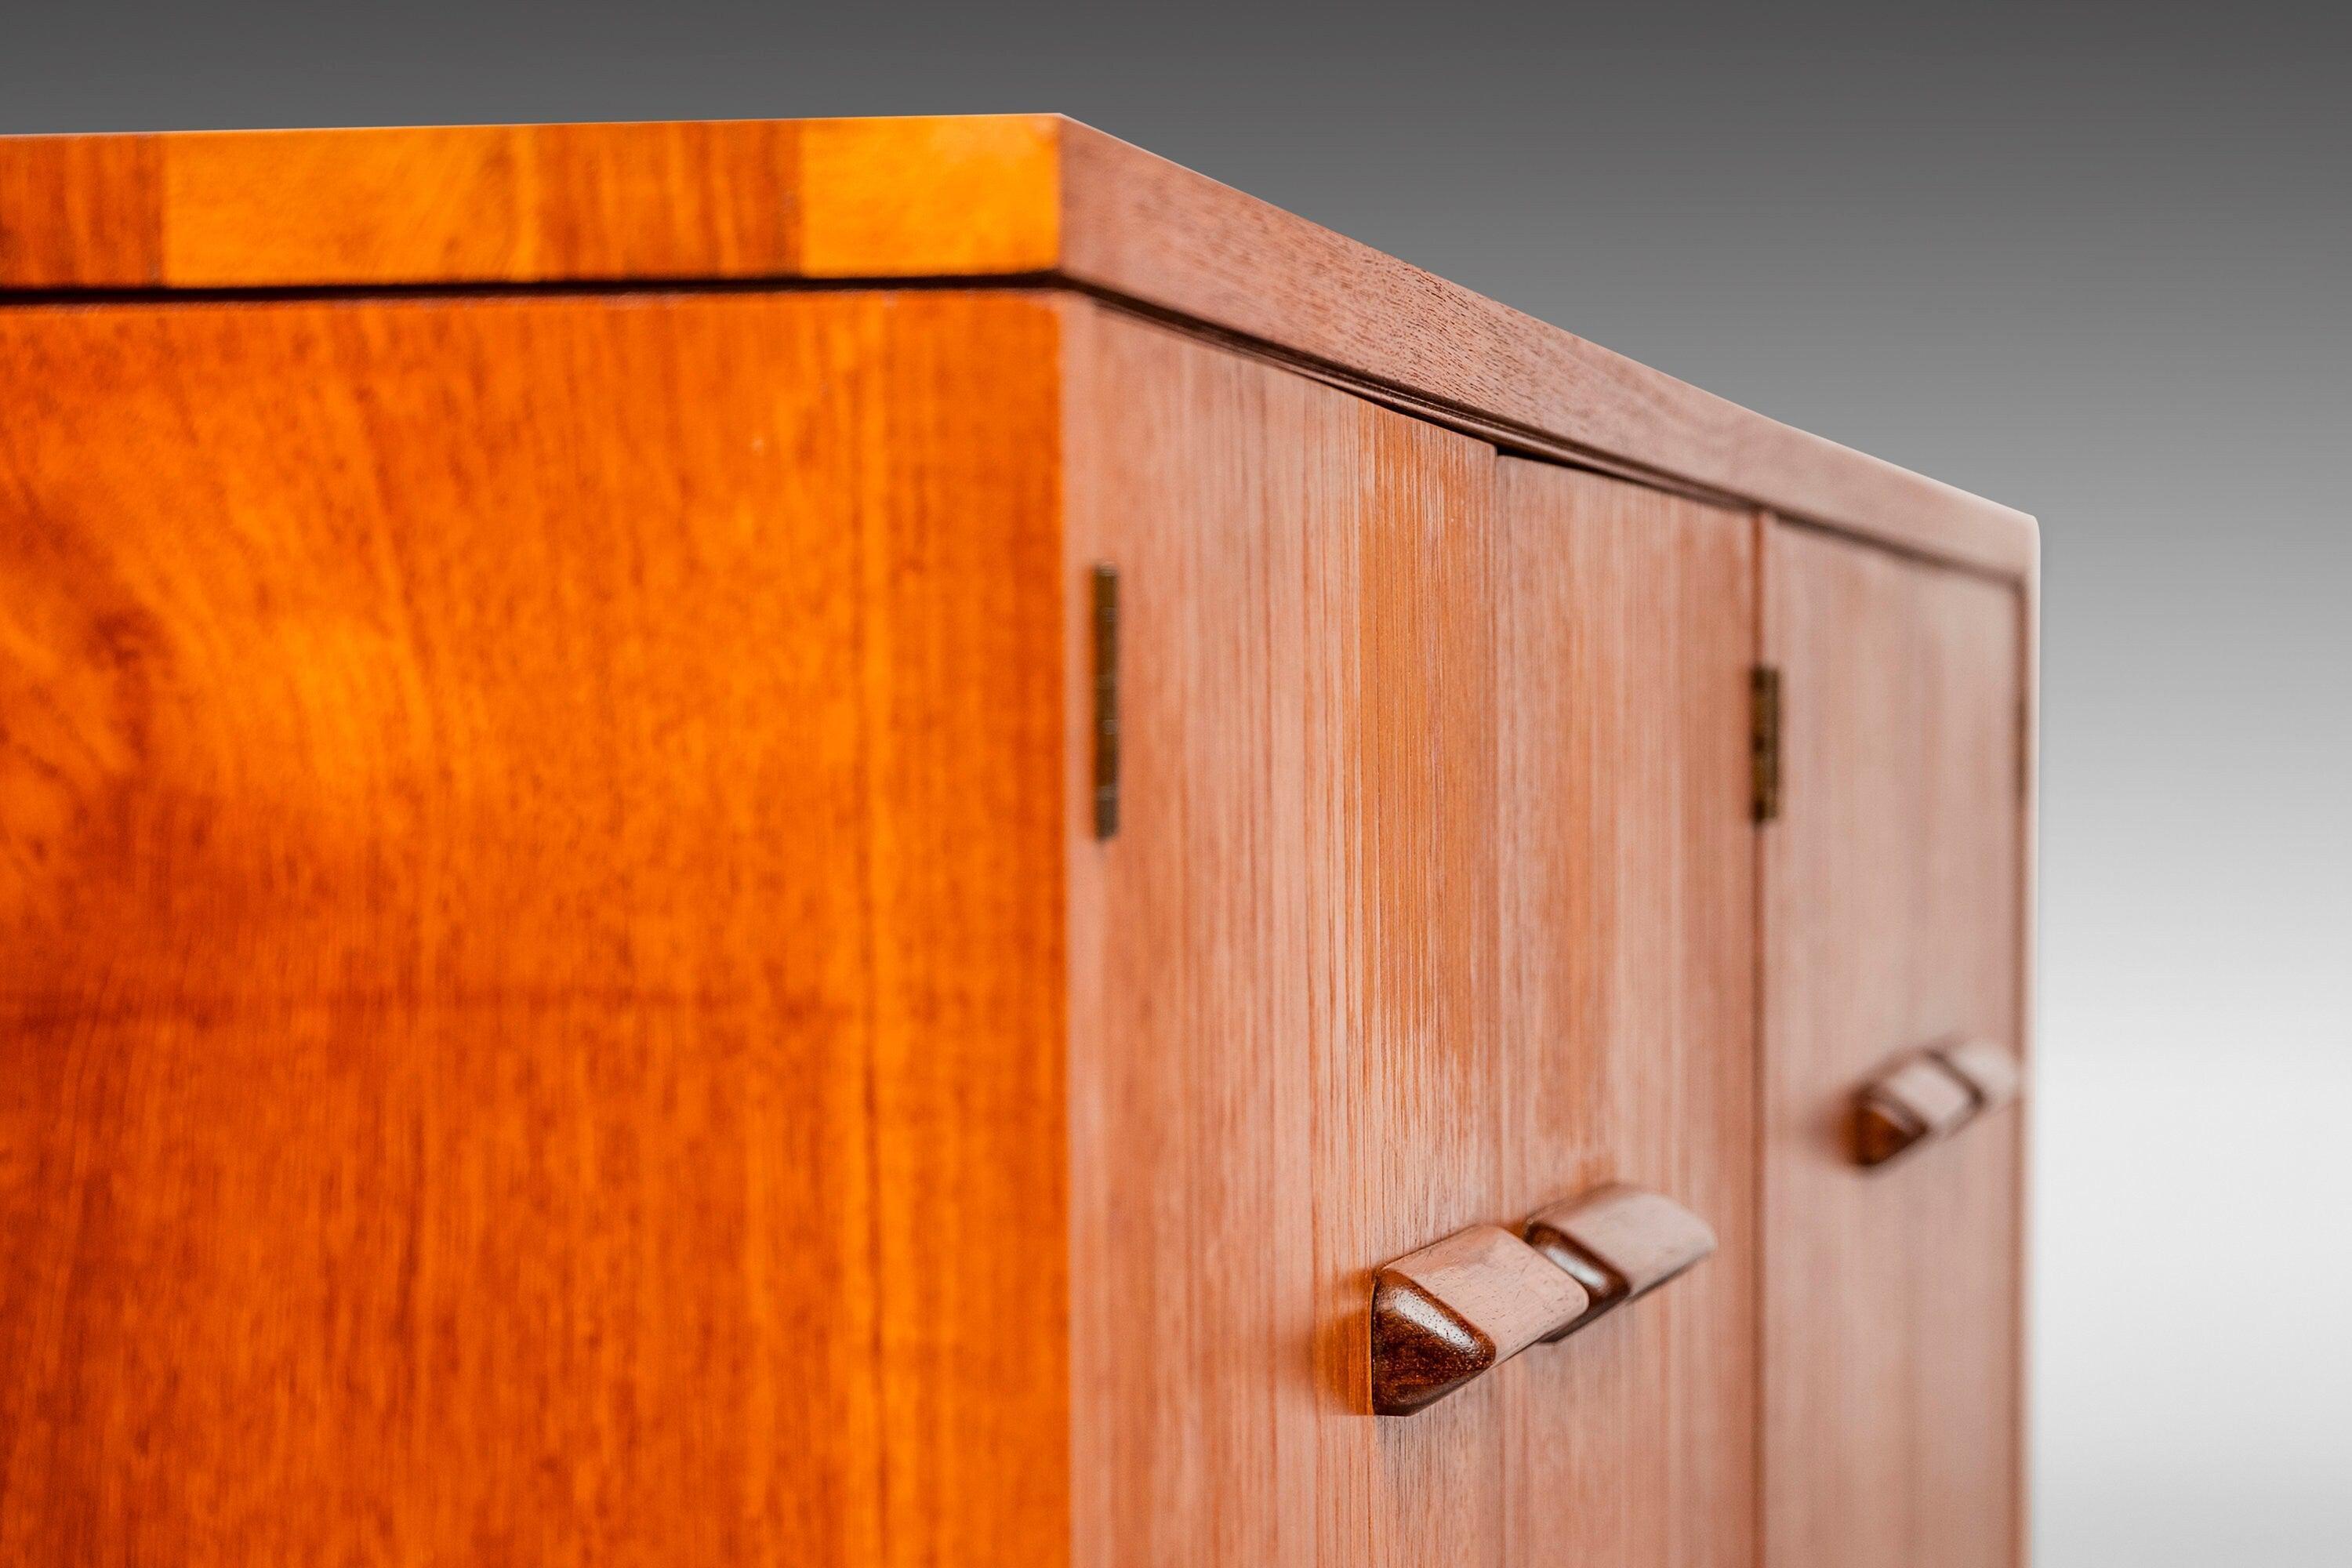 This extraordinary sideboard by Lane Furniture (Serial # 758250) is as rare as it is aesthetically captivating. The details of this piece are both subtle and eye-catching with an exquisite dovetail joint running along the top edges as well as the